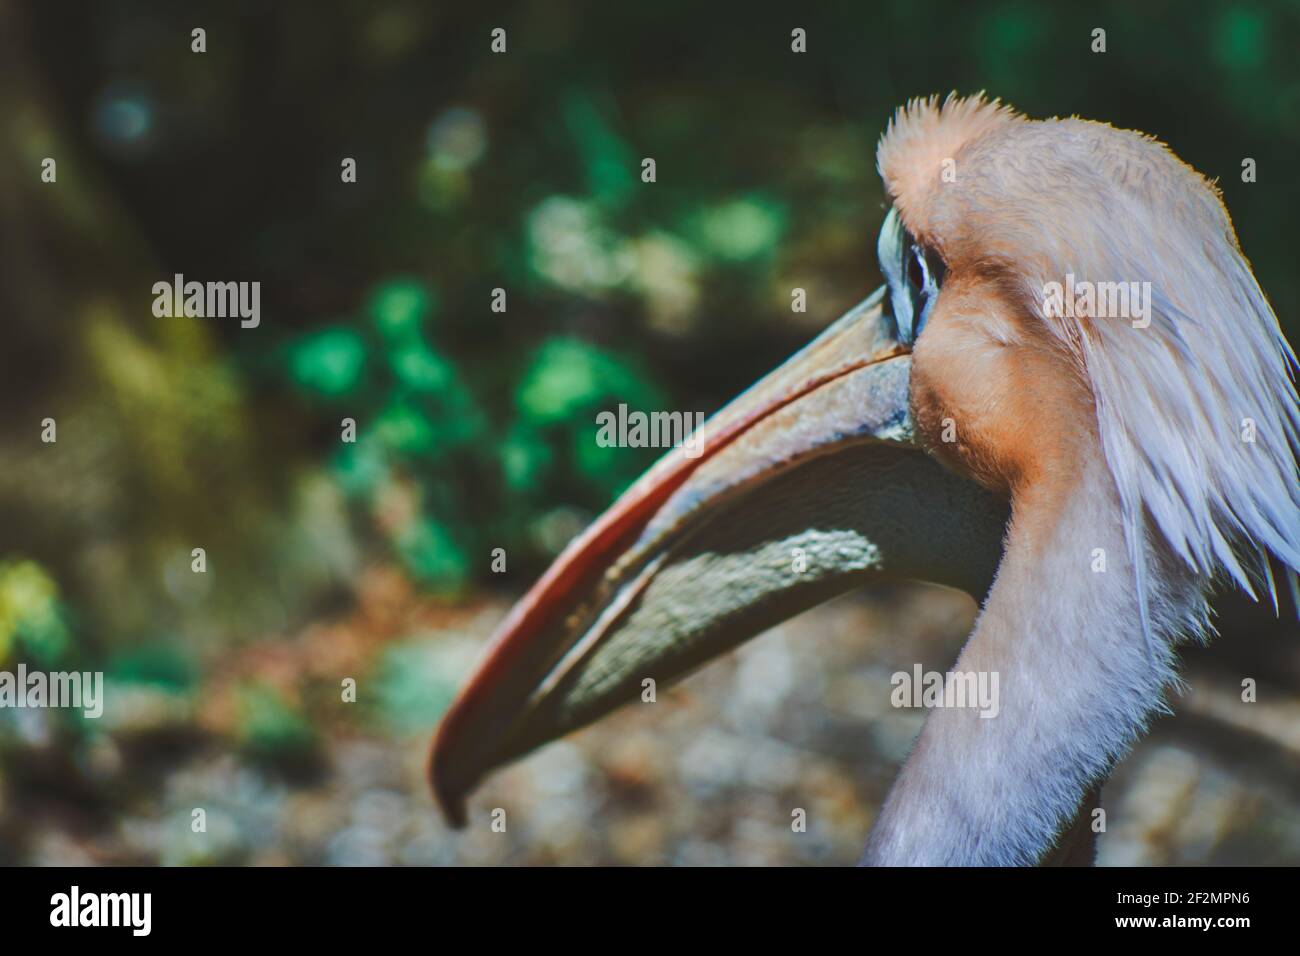 Close up of head from Great White Pelican Pelecanus onocrotalus with blurred background, Stock Photo